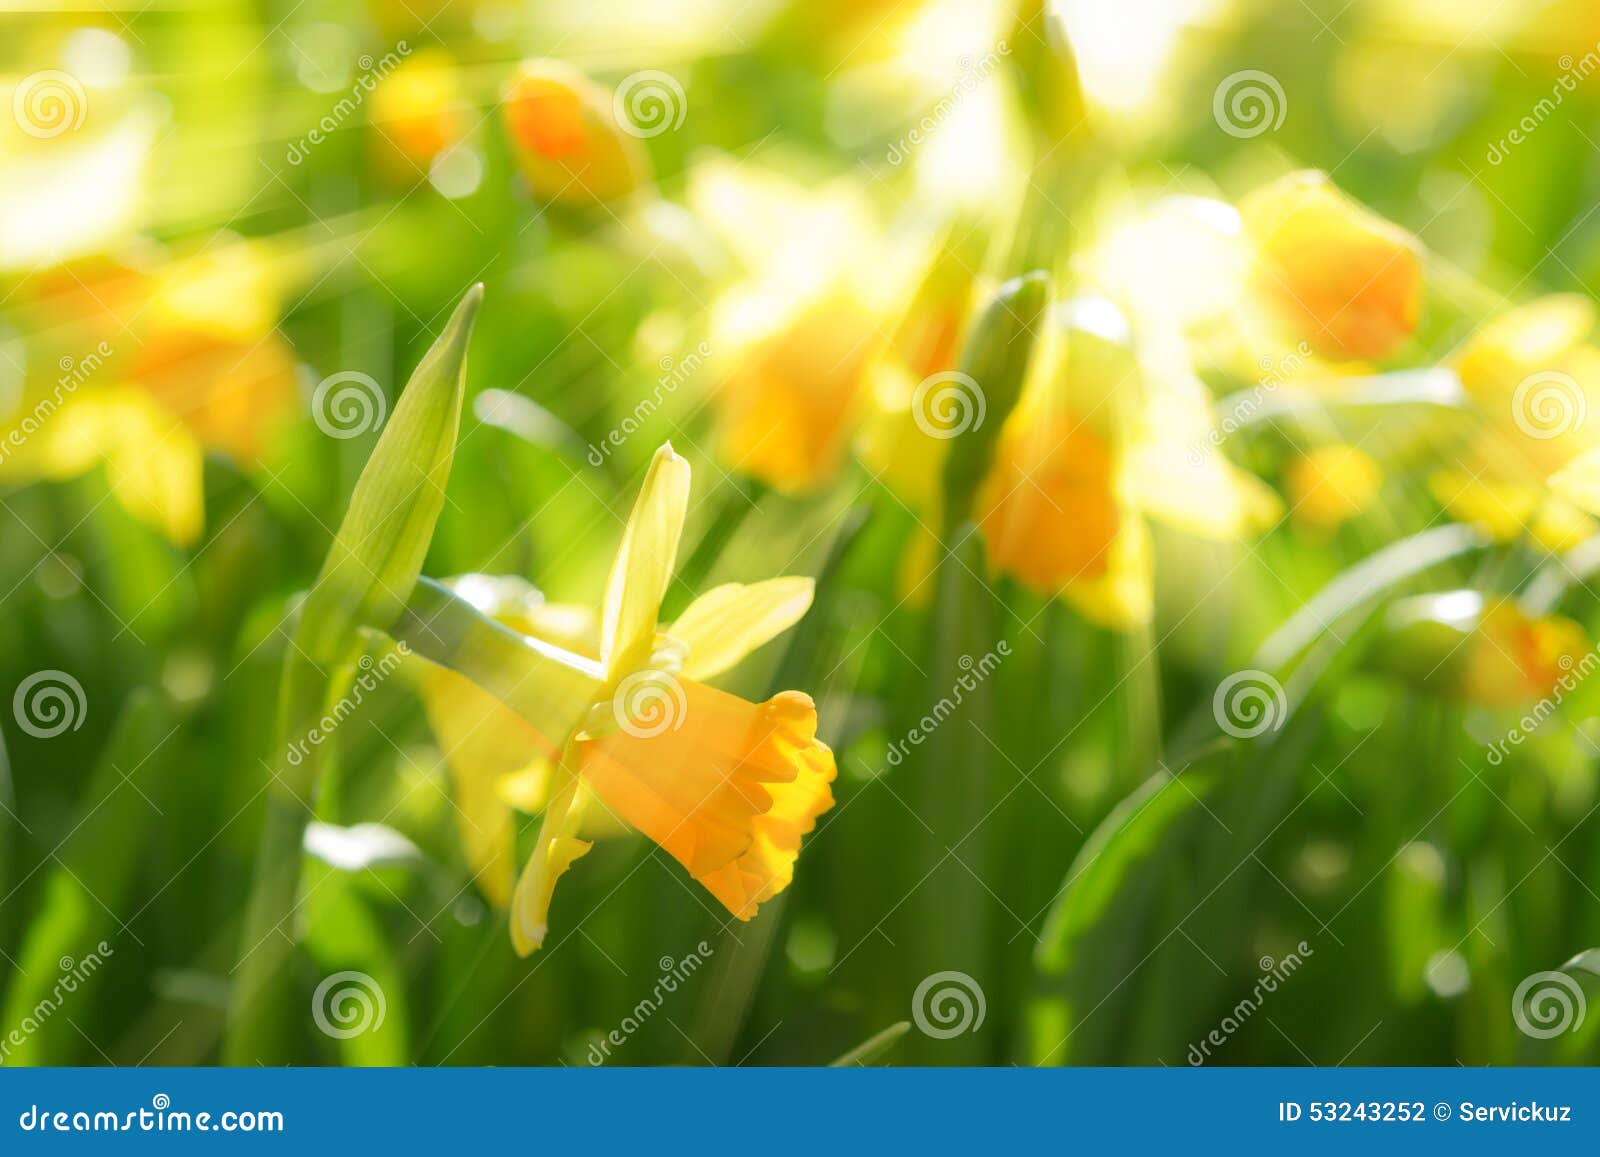 Yellow Spring Flowers Narcissus Daffodils With Bright Sunbeams Stock 